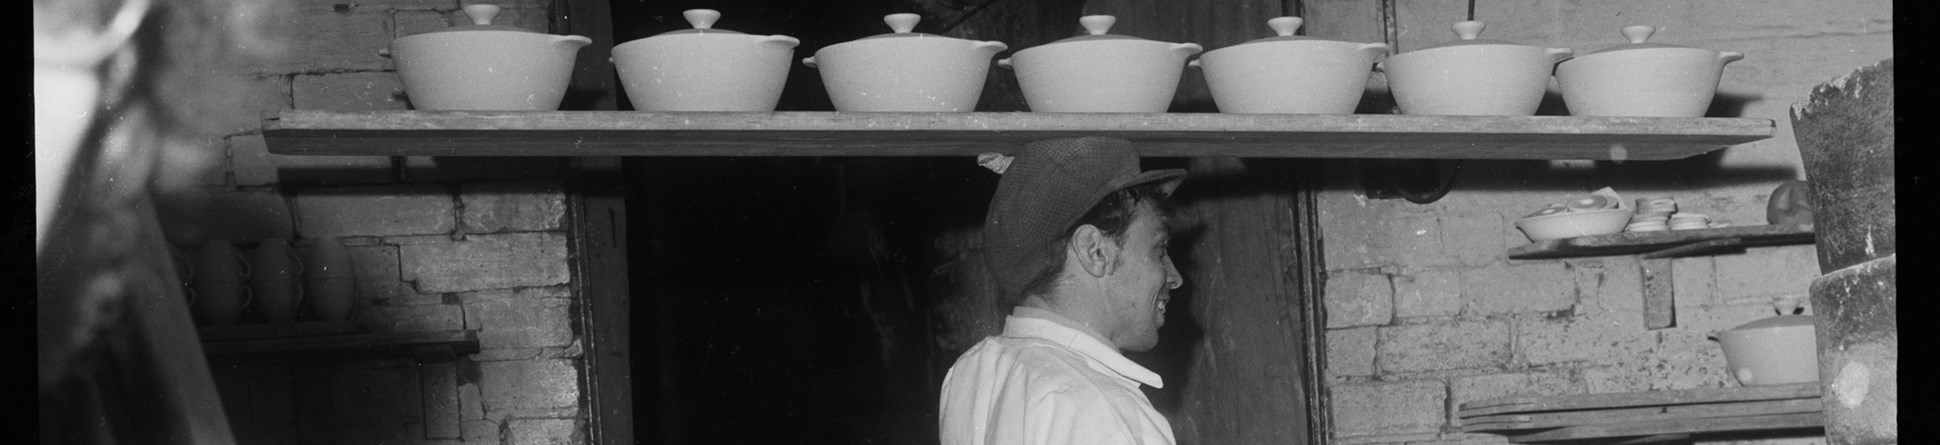 Man wearing cap and apron carries seven unglazed pots with lids on a plank on his head.